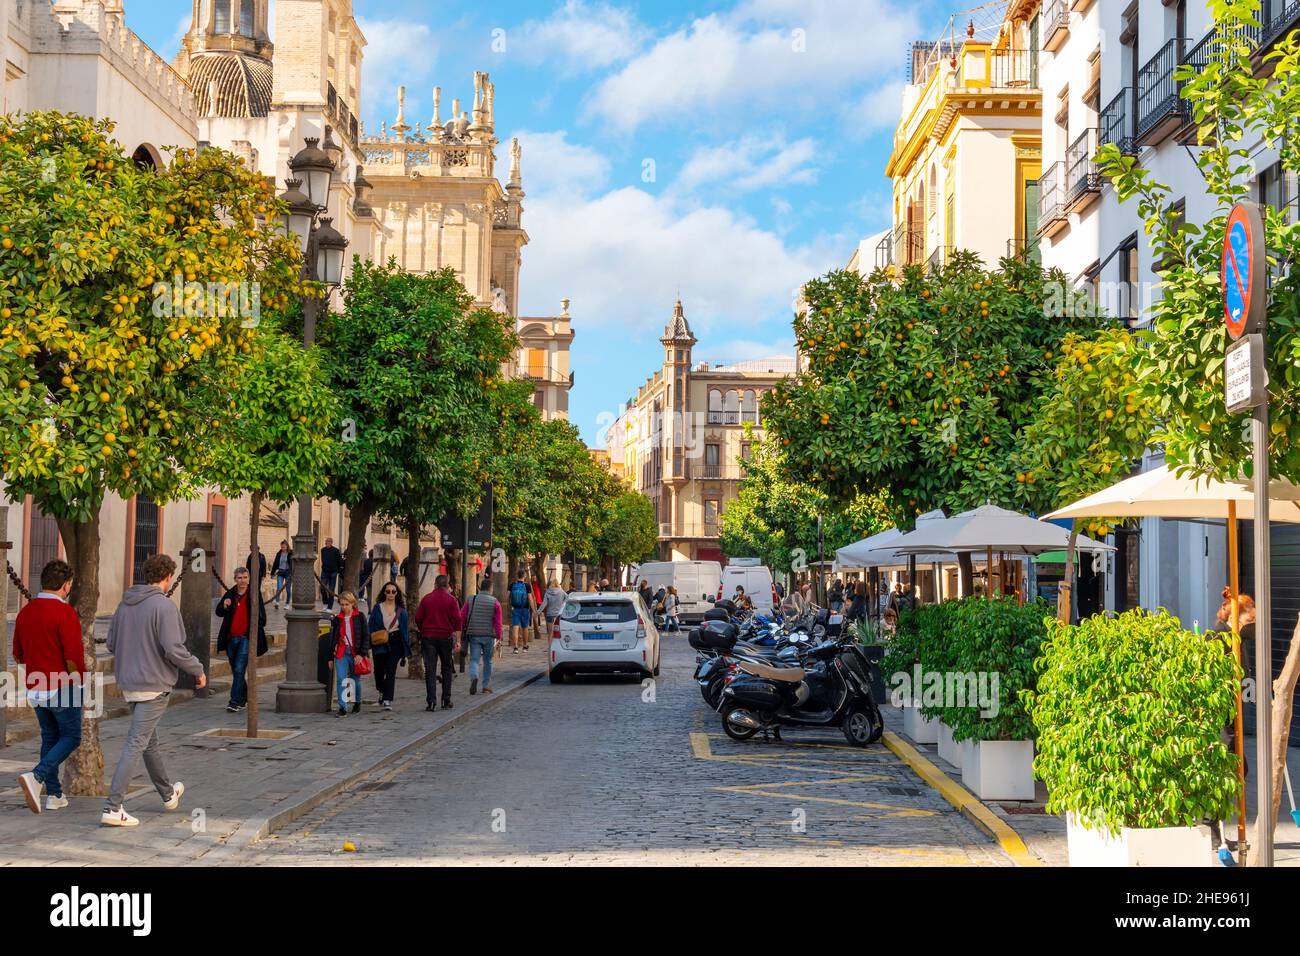 A busy street of cafes and orange trees next to the Great Cathedral of Seville on a sunny autumn day as tourists and Spaniards walk on the sidewalk. Stock Photo